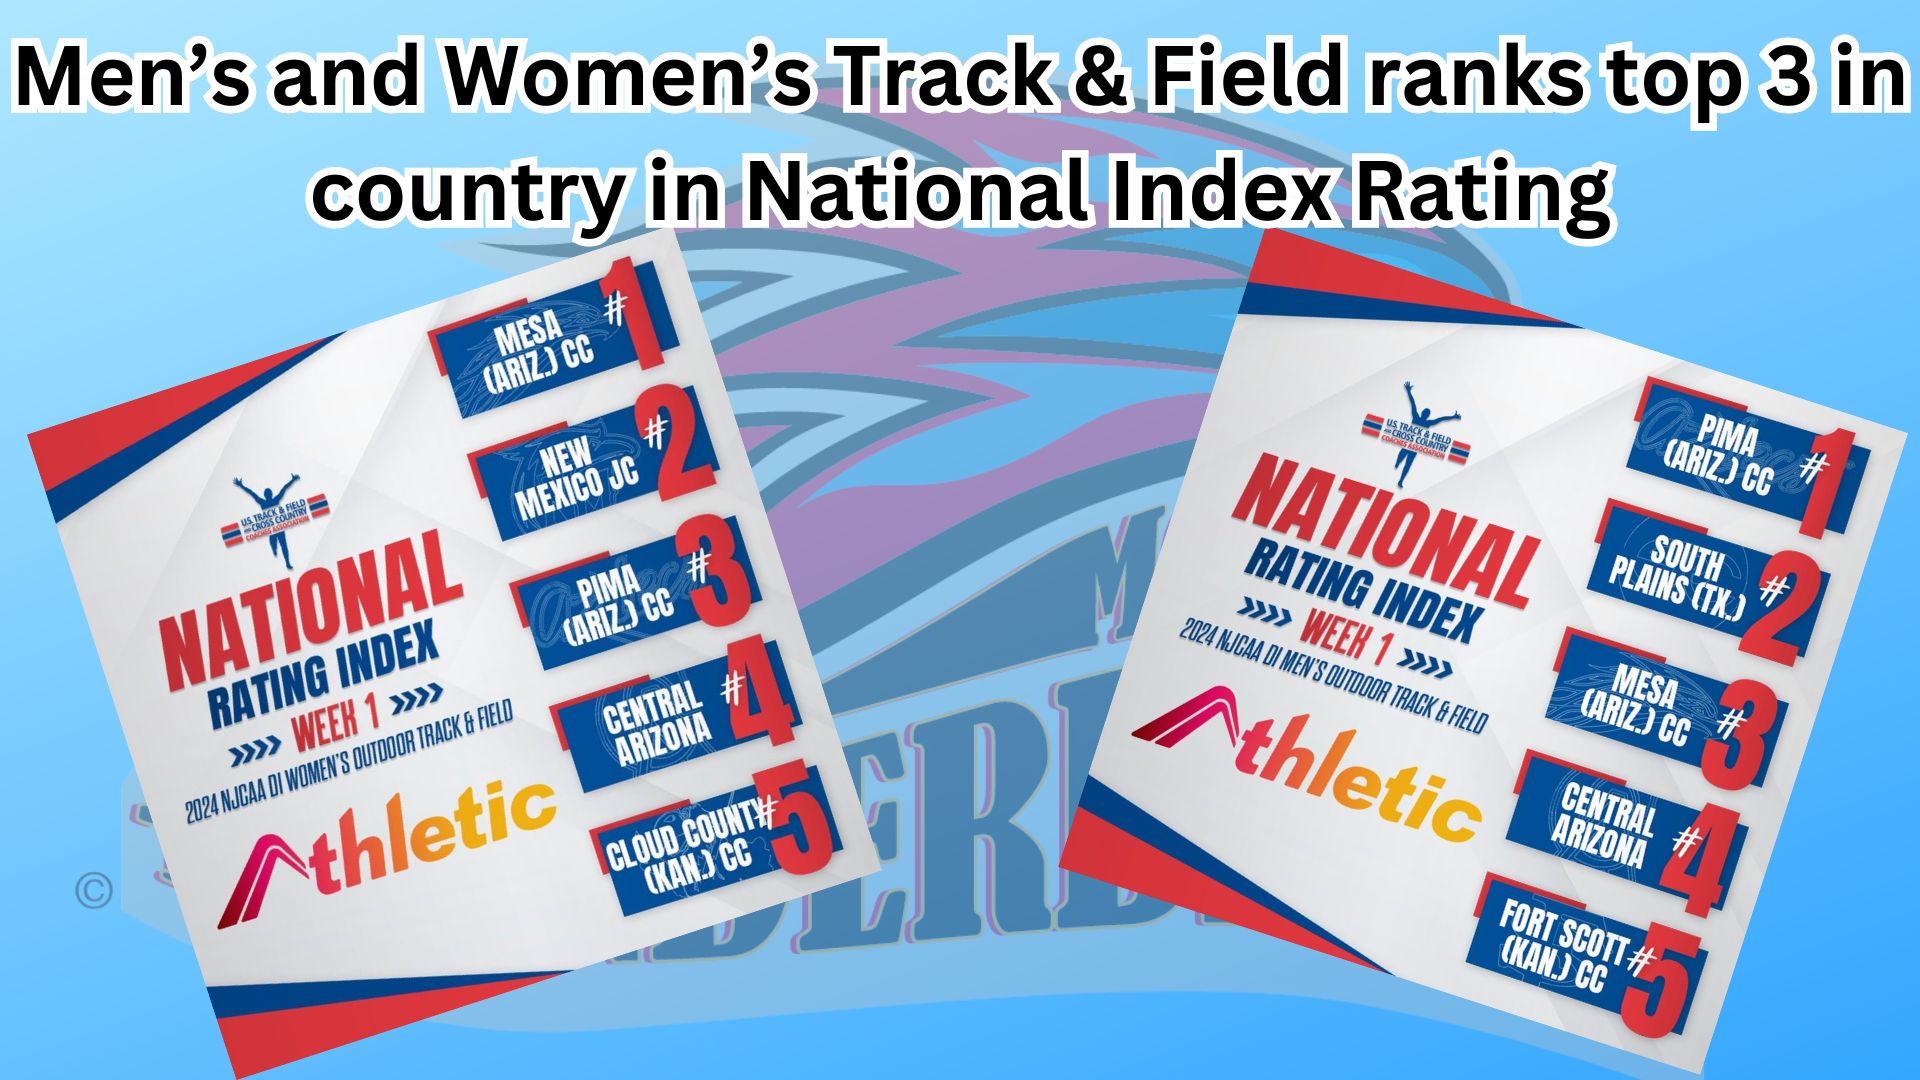 Mesa Track & Field ranks top three in nation for both and women in latest National Rating Index